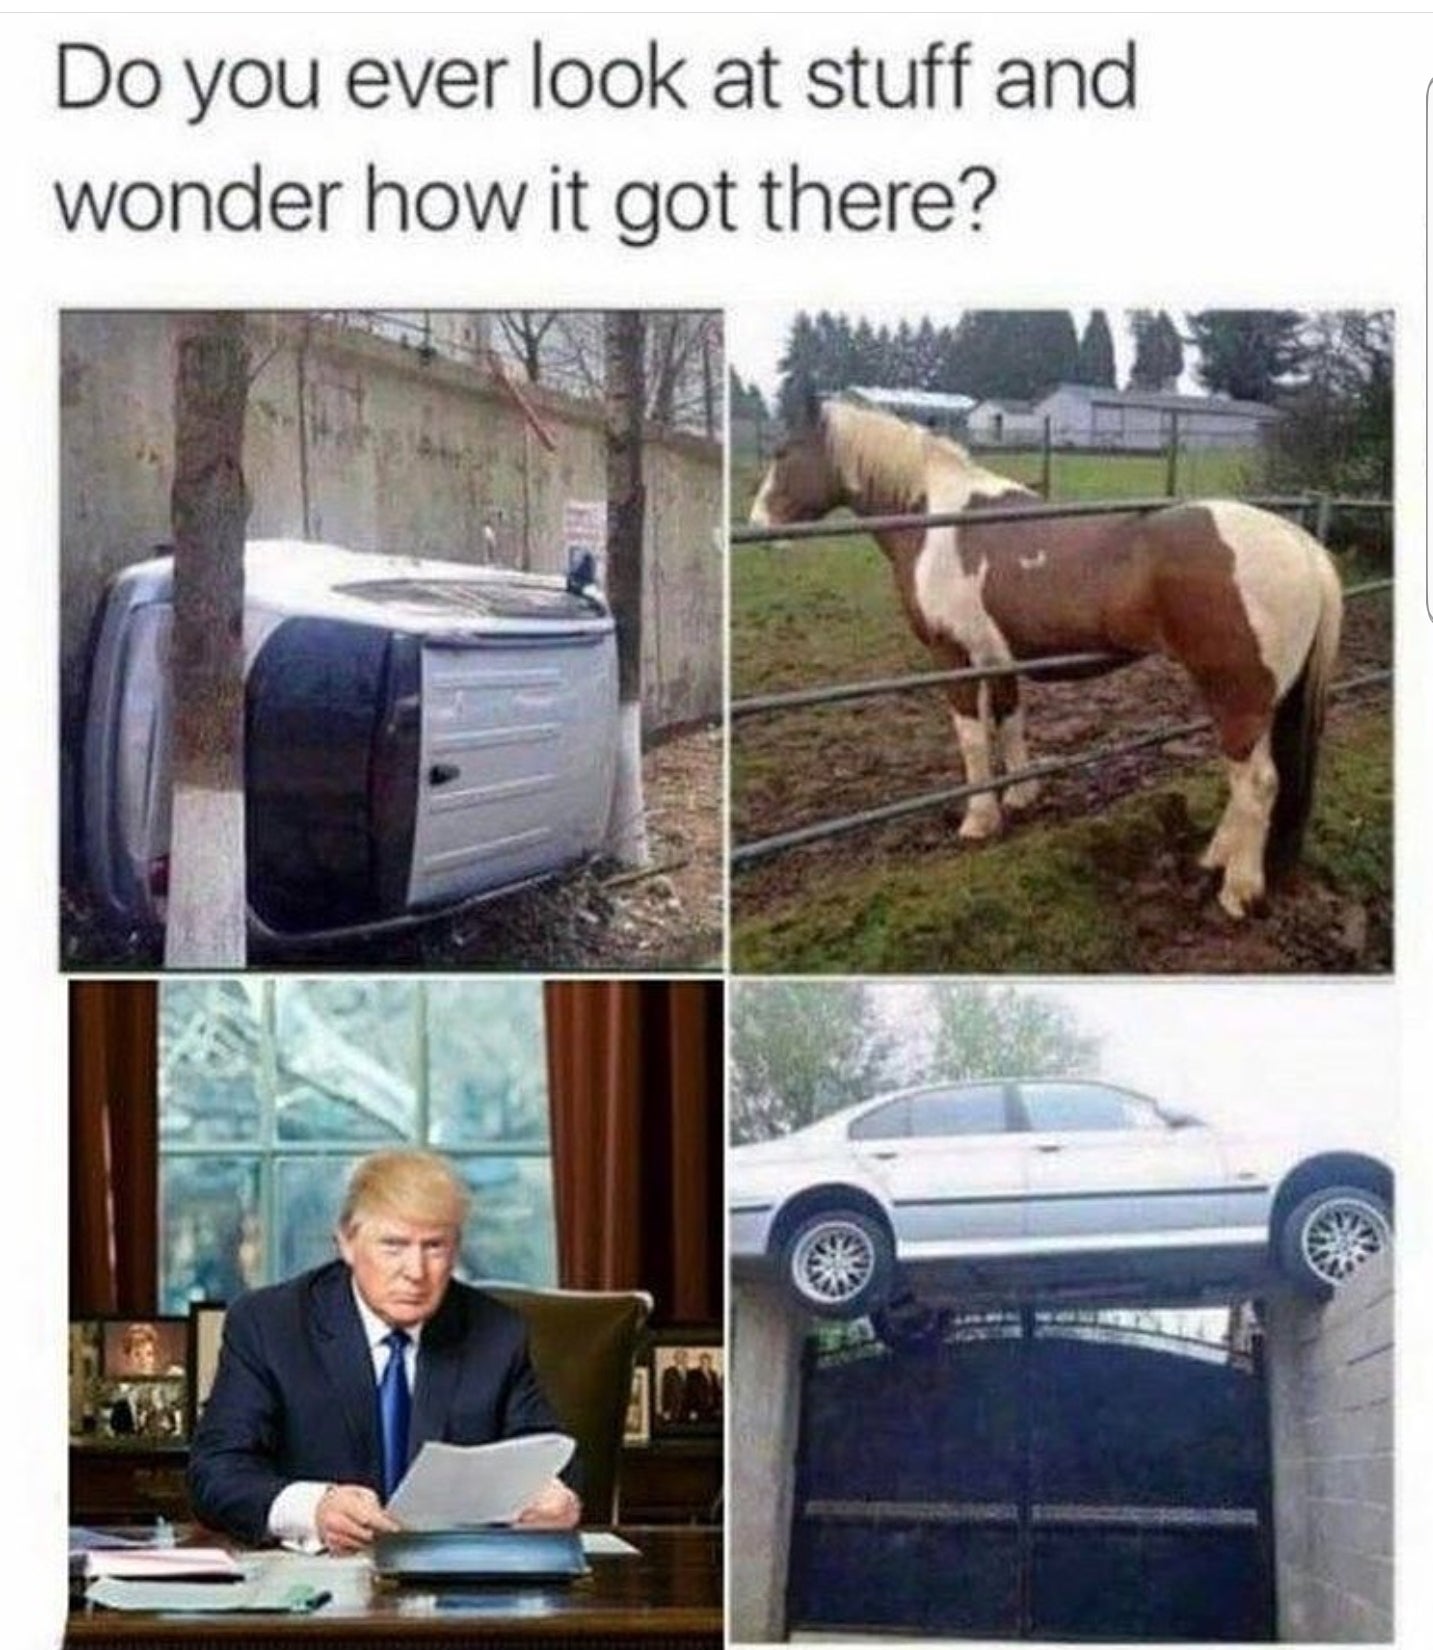 meme how did they get there - Do you ever look at stuff and wonder how it got there?